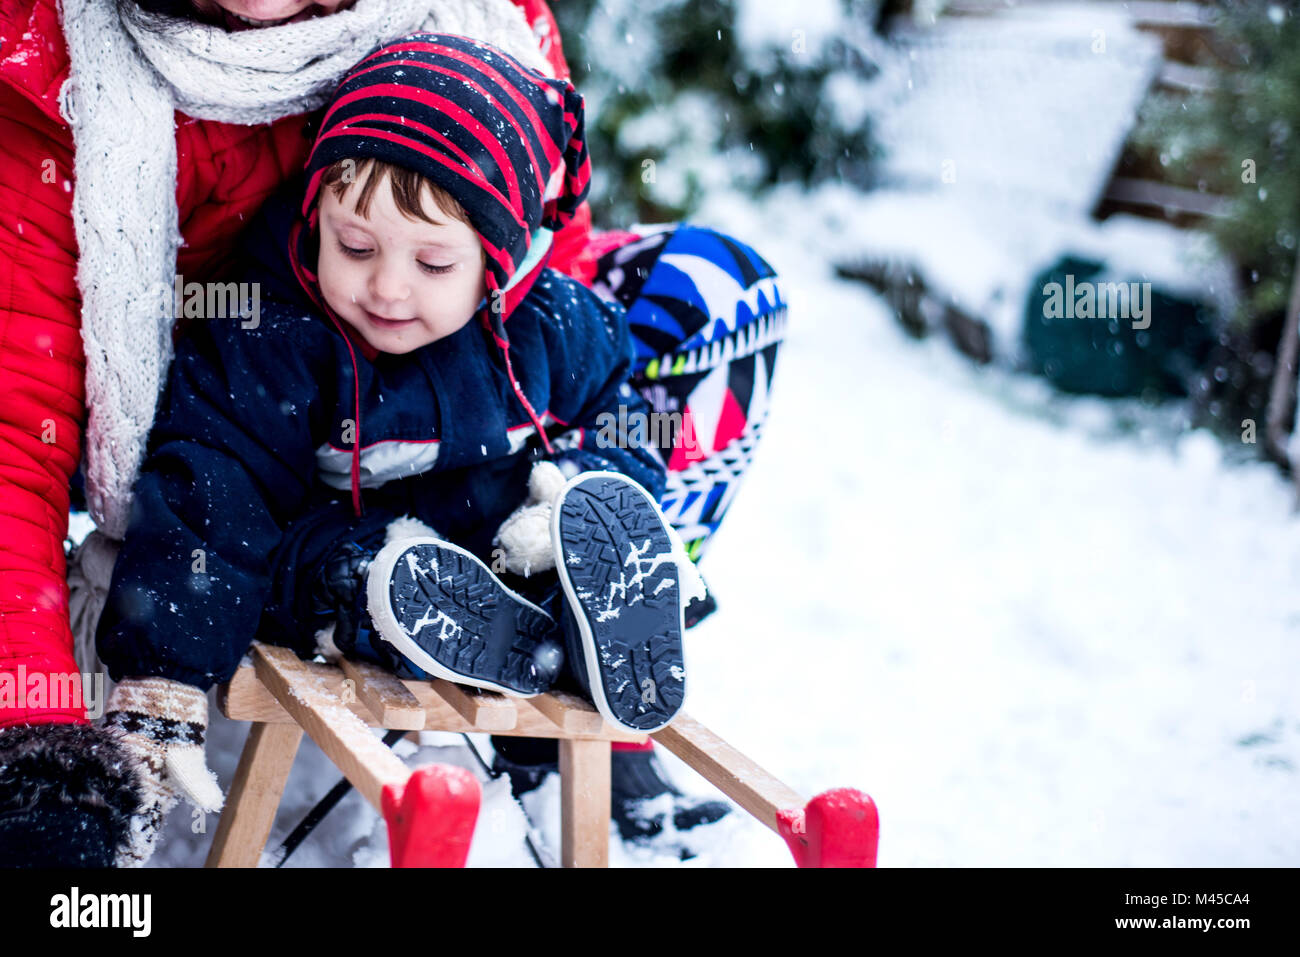 Mother and son in snow on toboggan Stock Photo